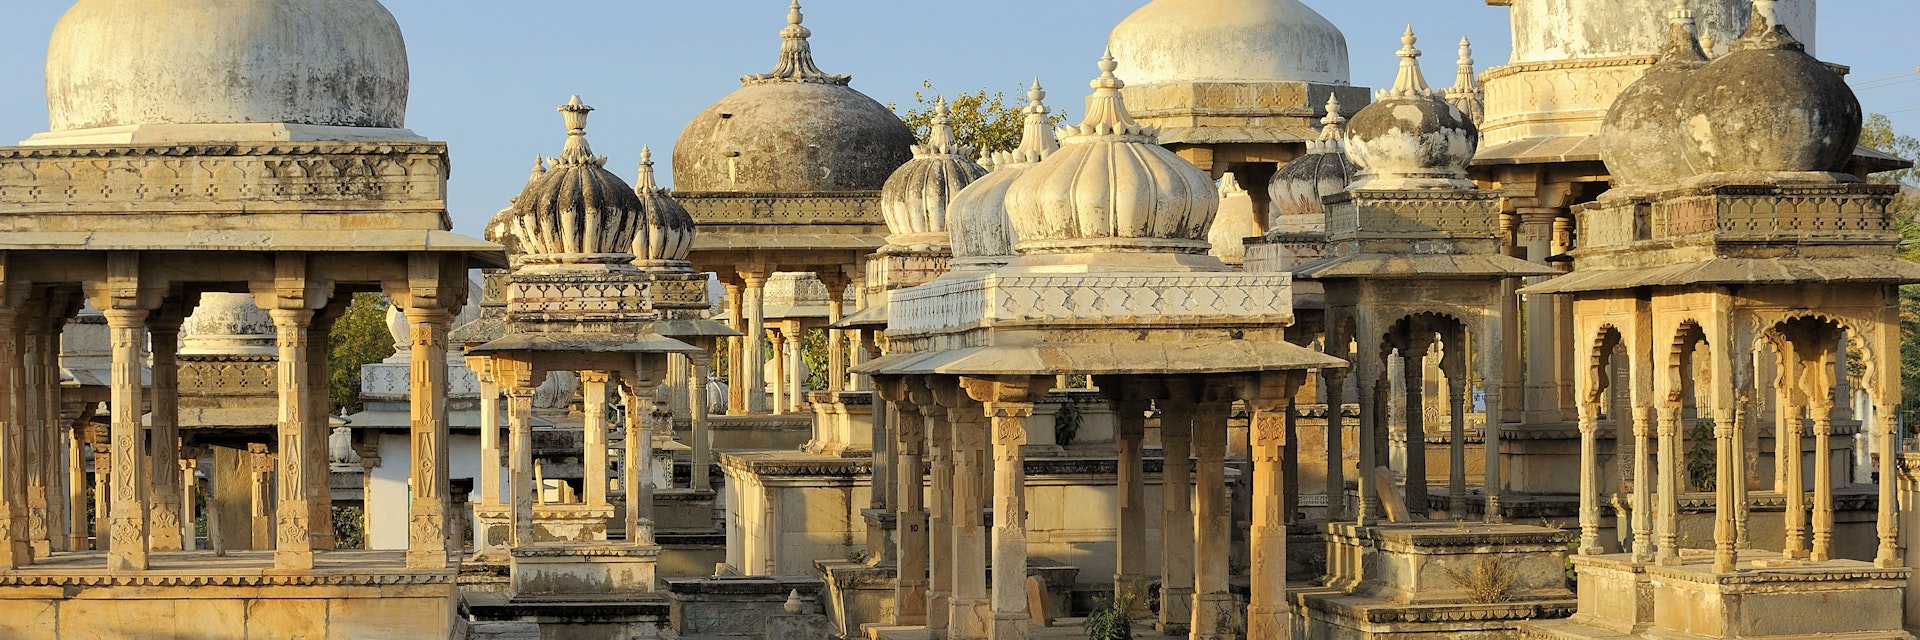 India, Rajasthan State, surroundings of Udaipur, Ahar site contains more than 250 cenotaphs of the maharanas of Mewar that were built over approximately 350 years. There are 19 chhatris that commemorate the 19 maharajas who were cremated here